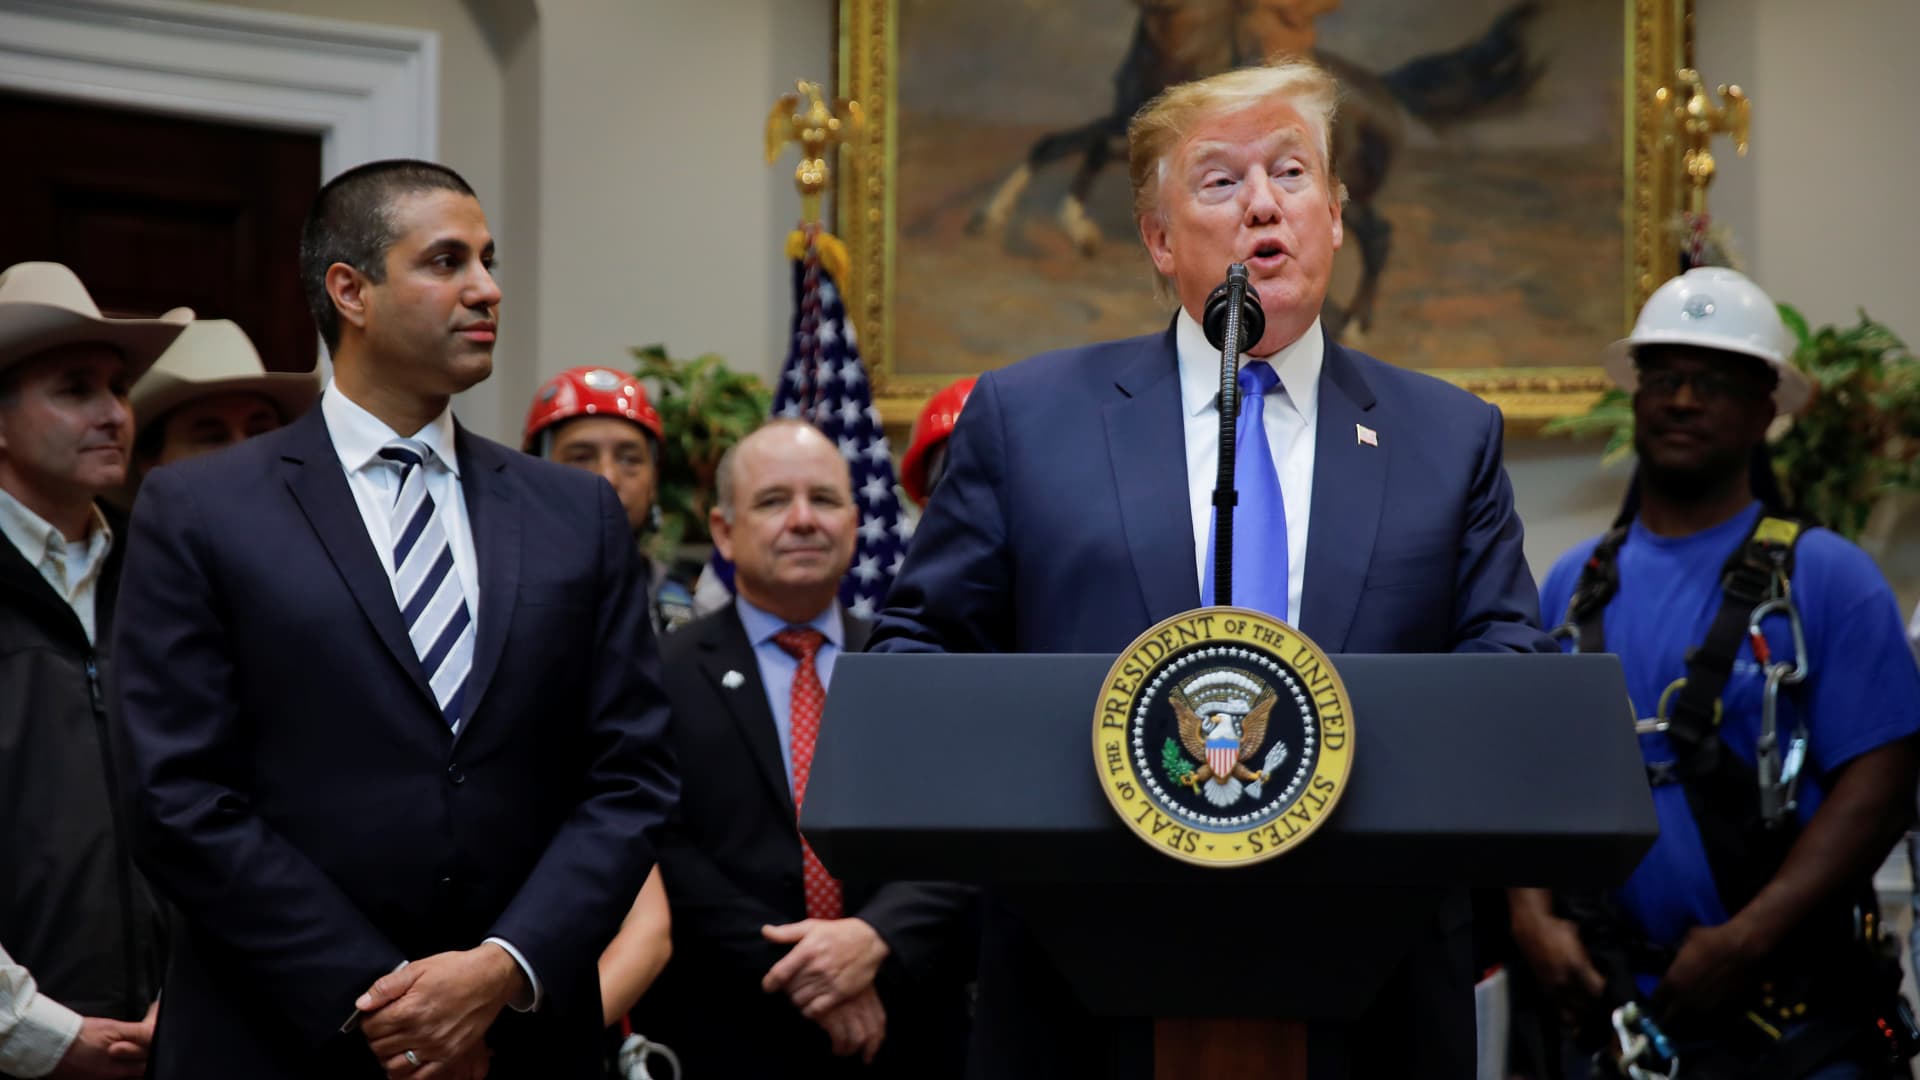 President Trump announces new 5G initiatives: It's a race 'America must win'